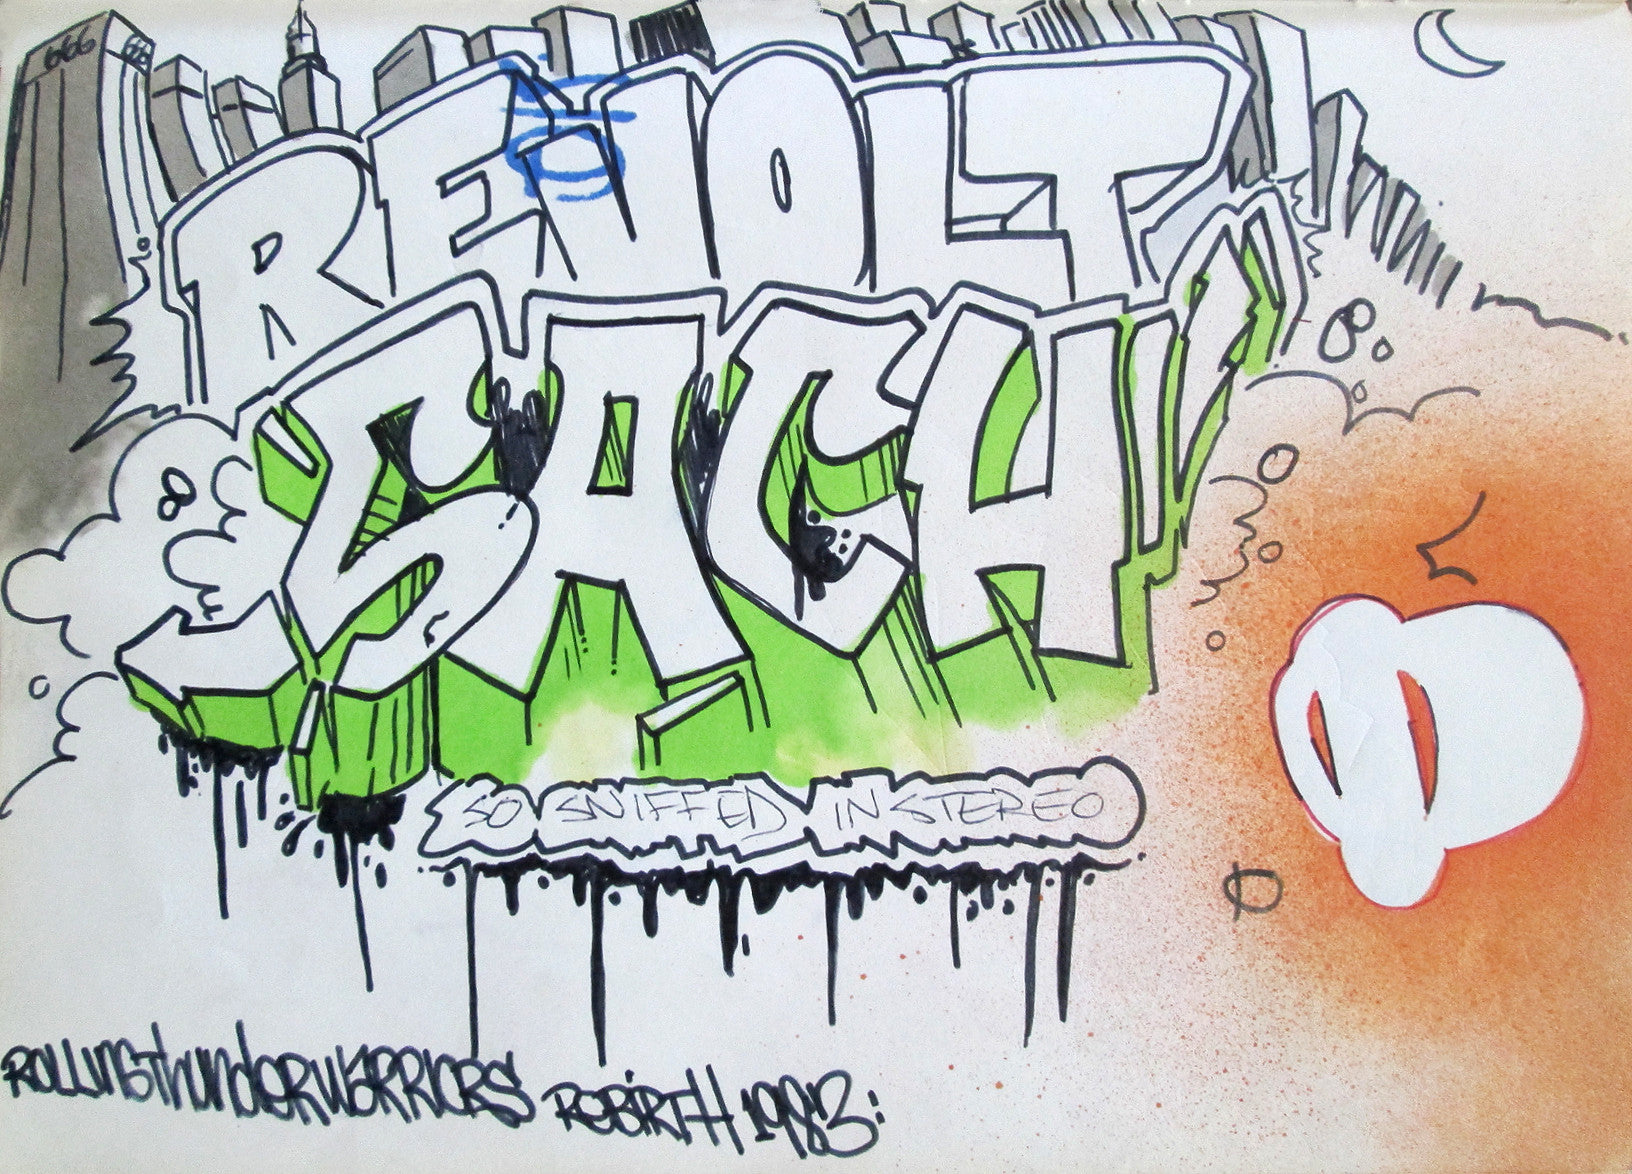 Revolt/ SACH - "In Stereo" Black Book Page